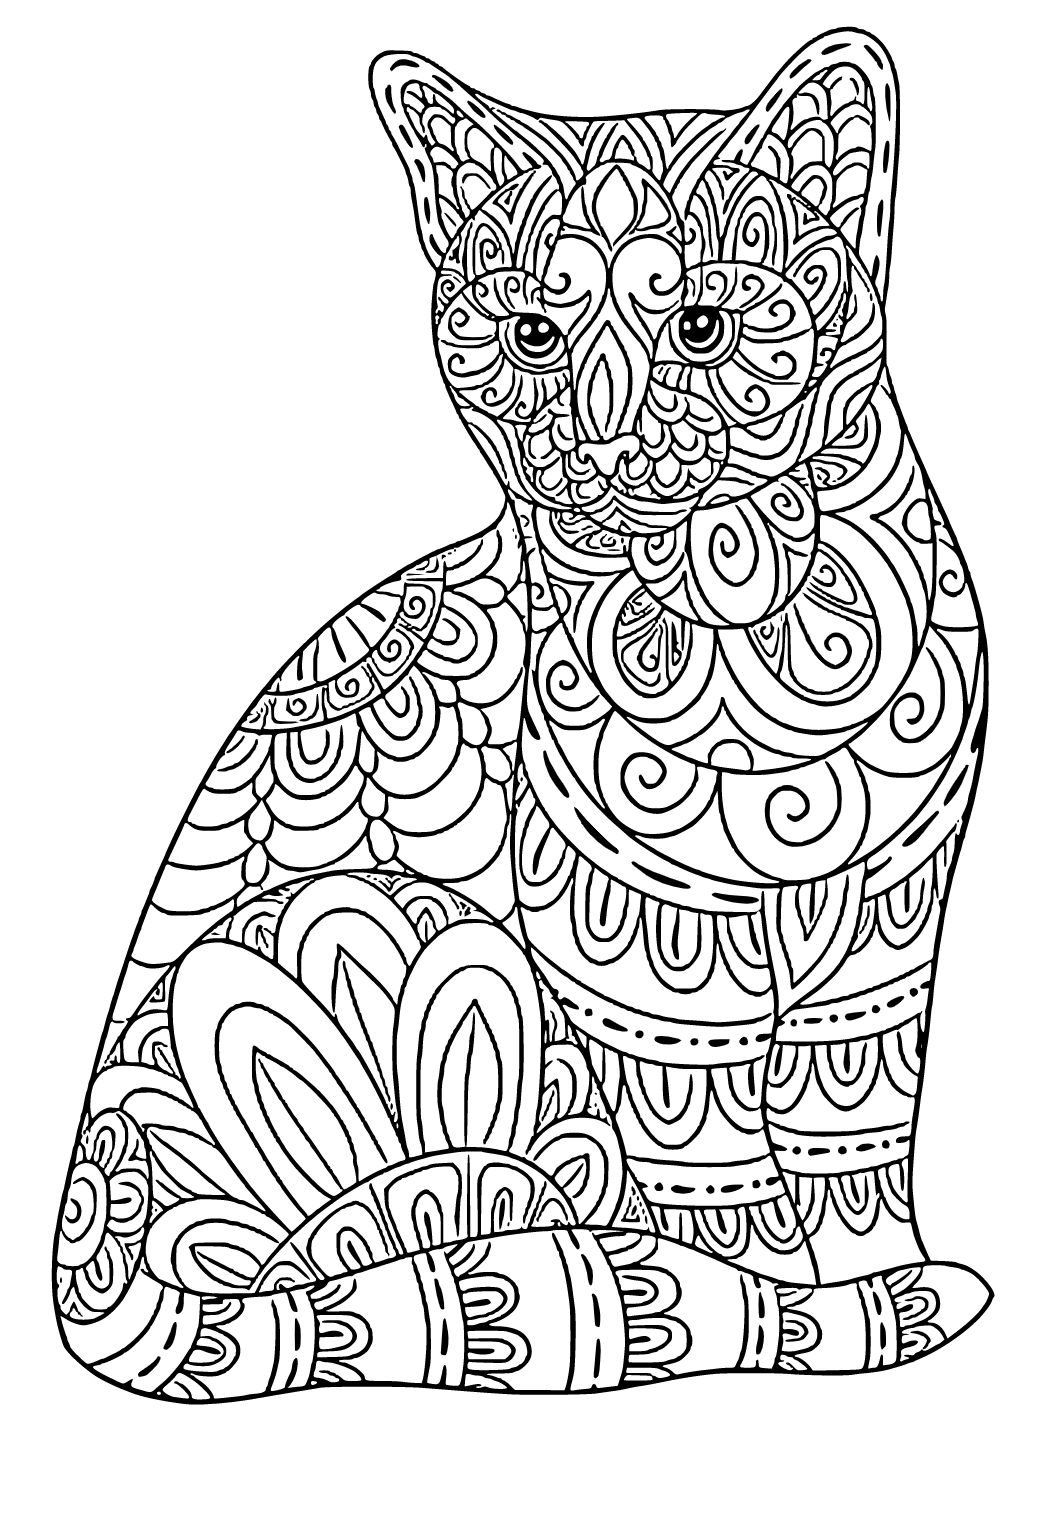 Free Printable Cat Mandala Coloring Page for Adults and Kids